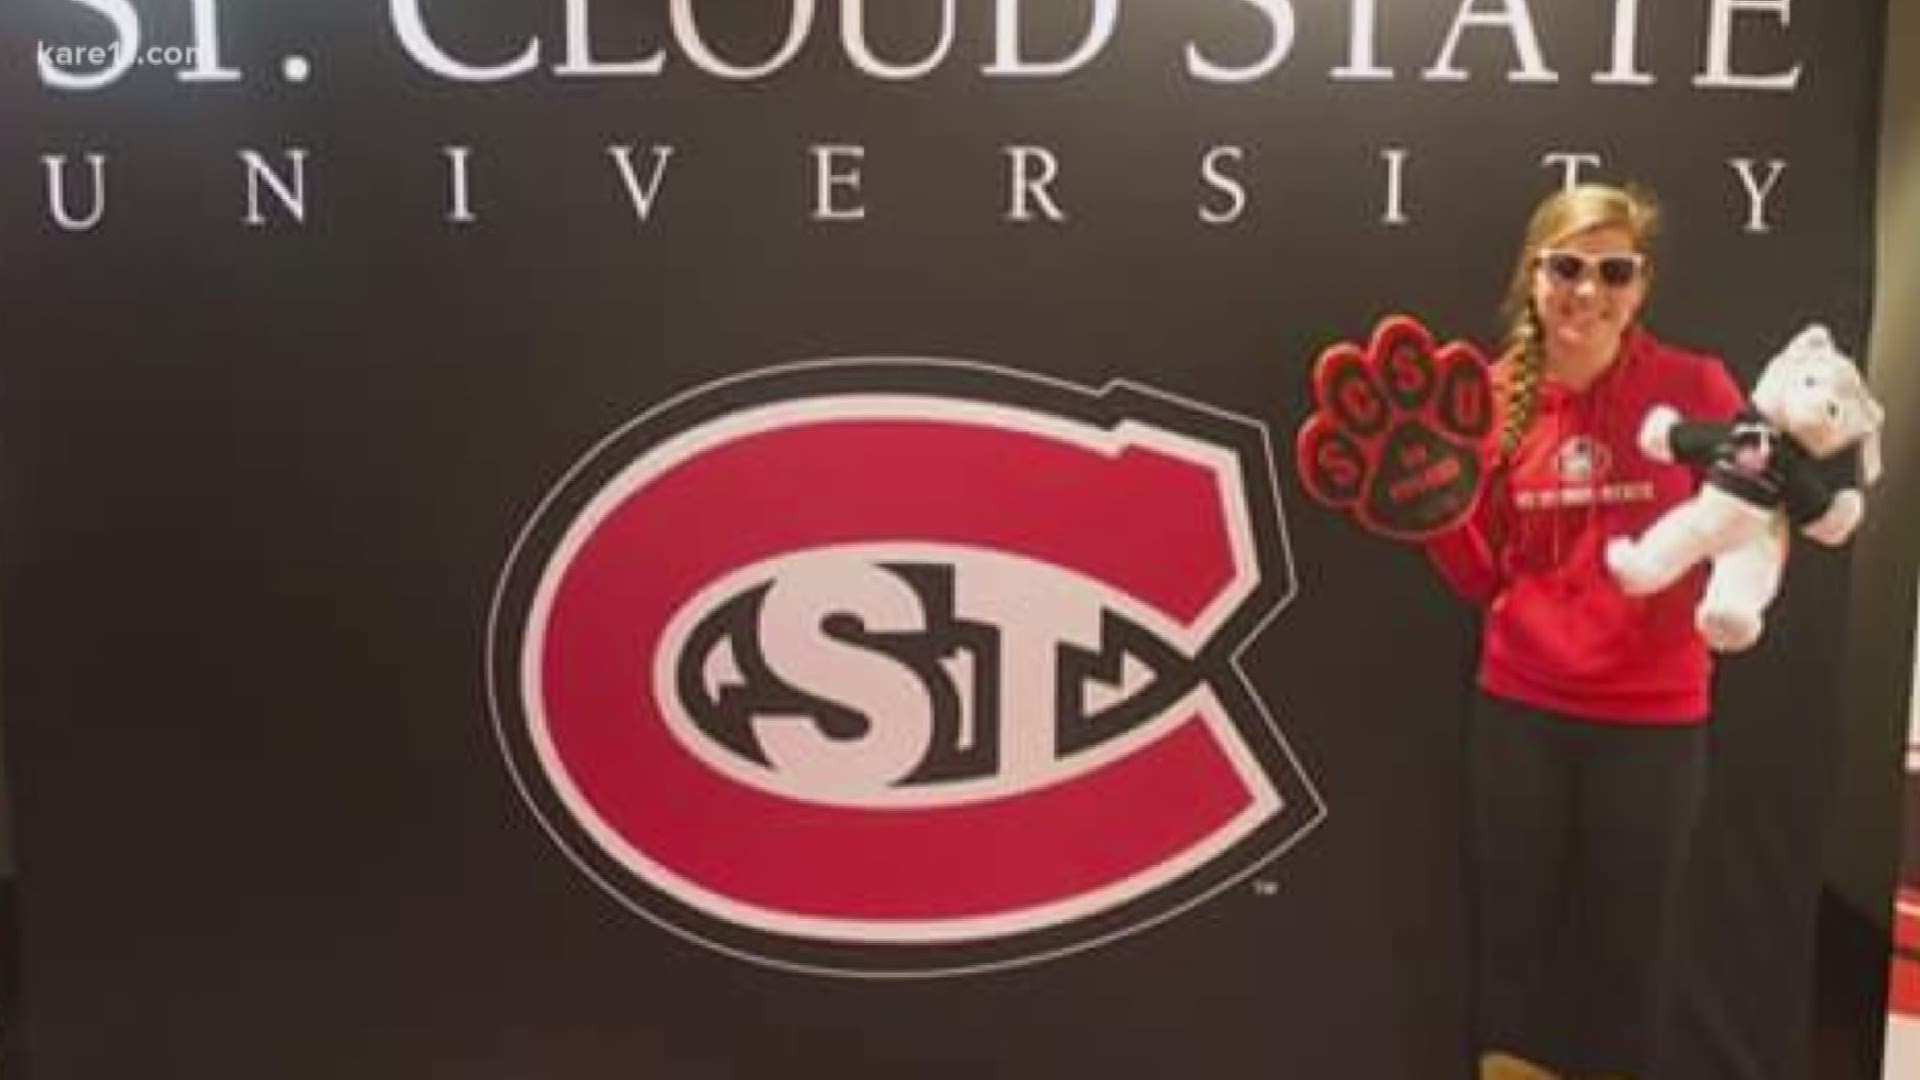 Move-in day at St. Cloud State University was exciting for sophomore Maria Heltne from Elk Mound Wisconsin.